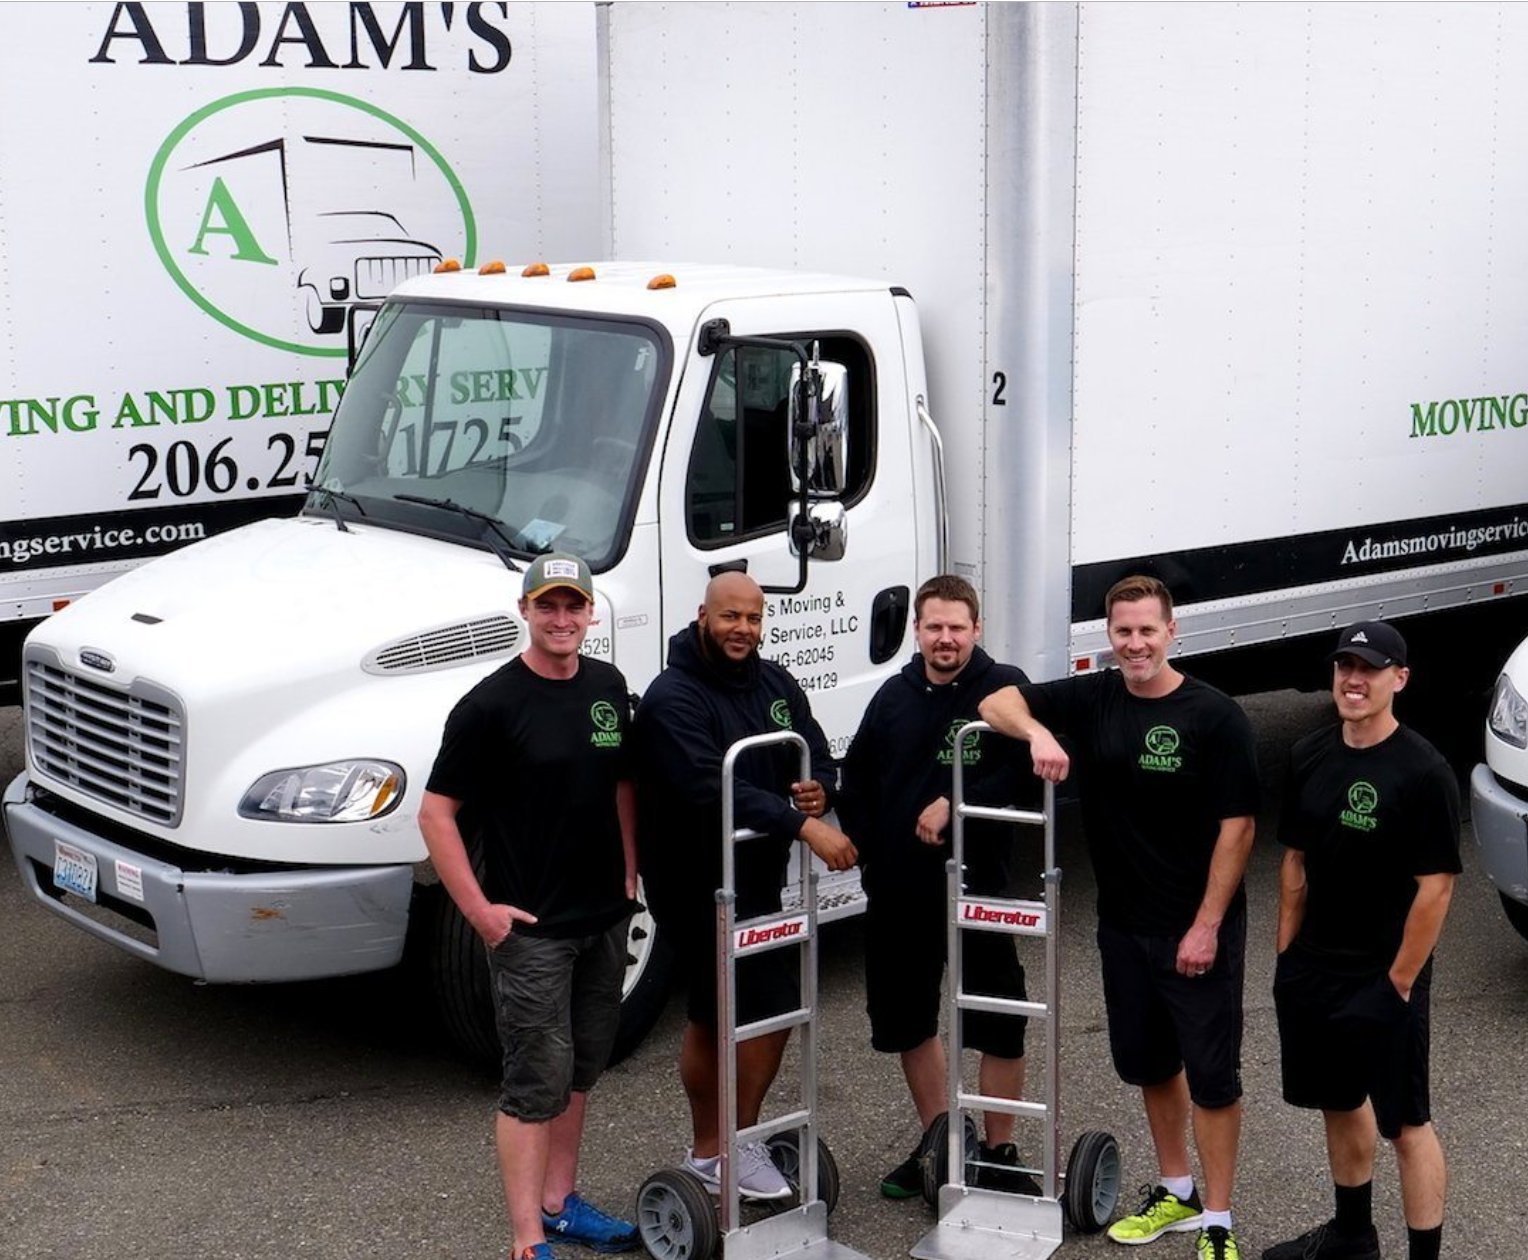 Adam's Moving & Delivery Service